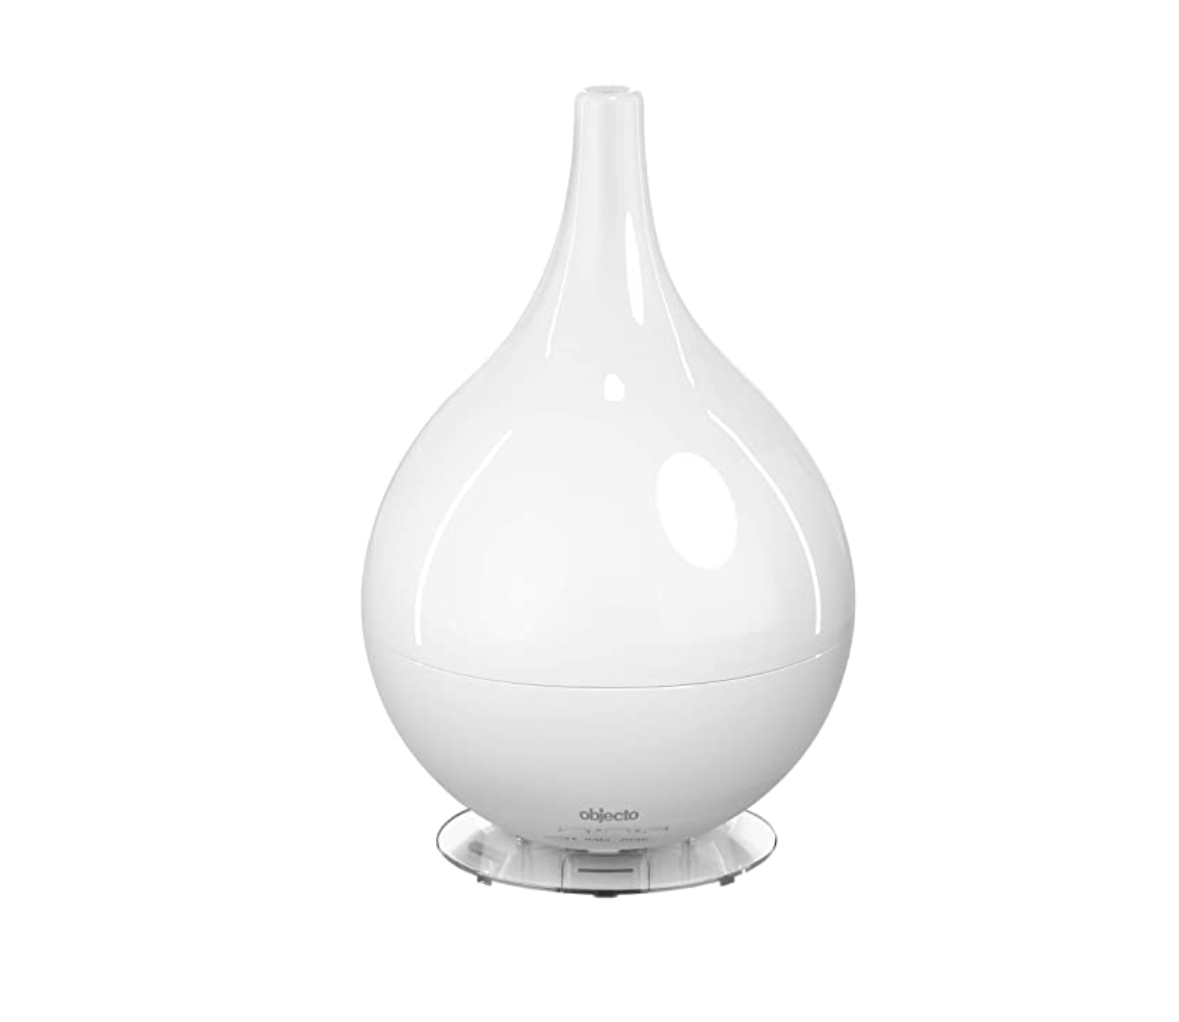 Objecto-Cool-Mist-Humidifier-with-Aroma-Therapy